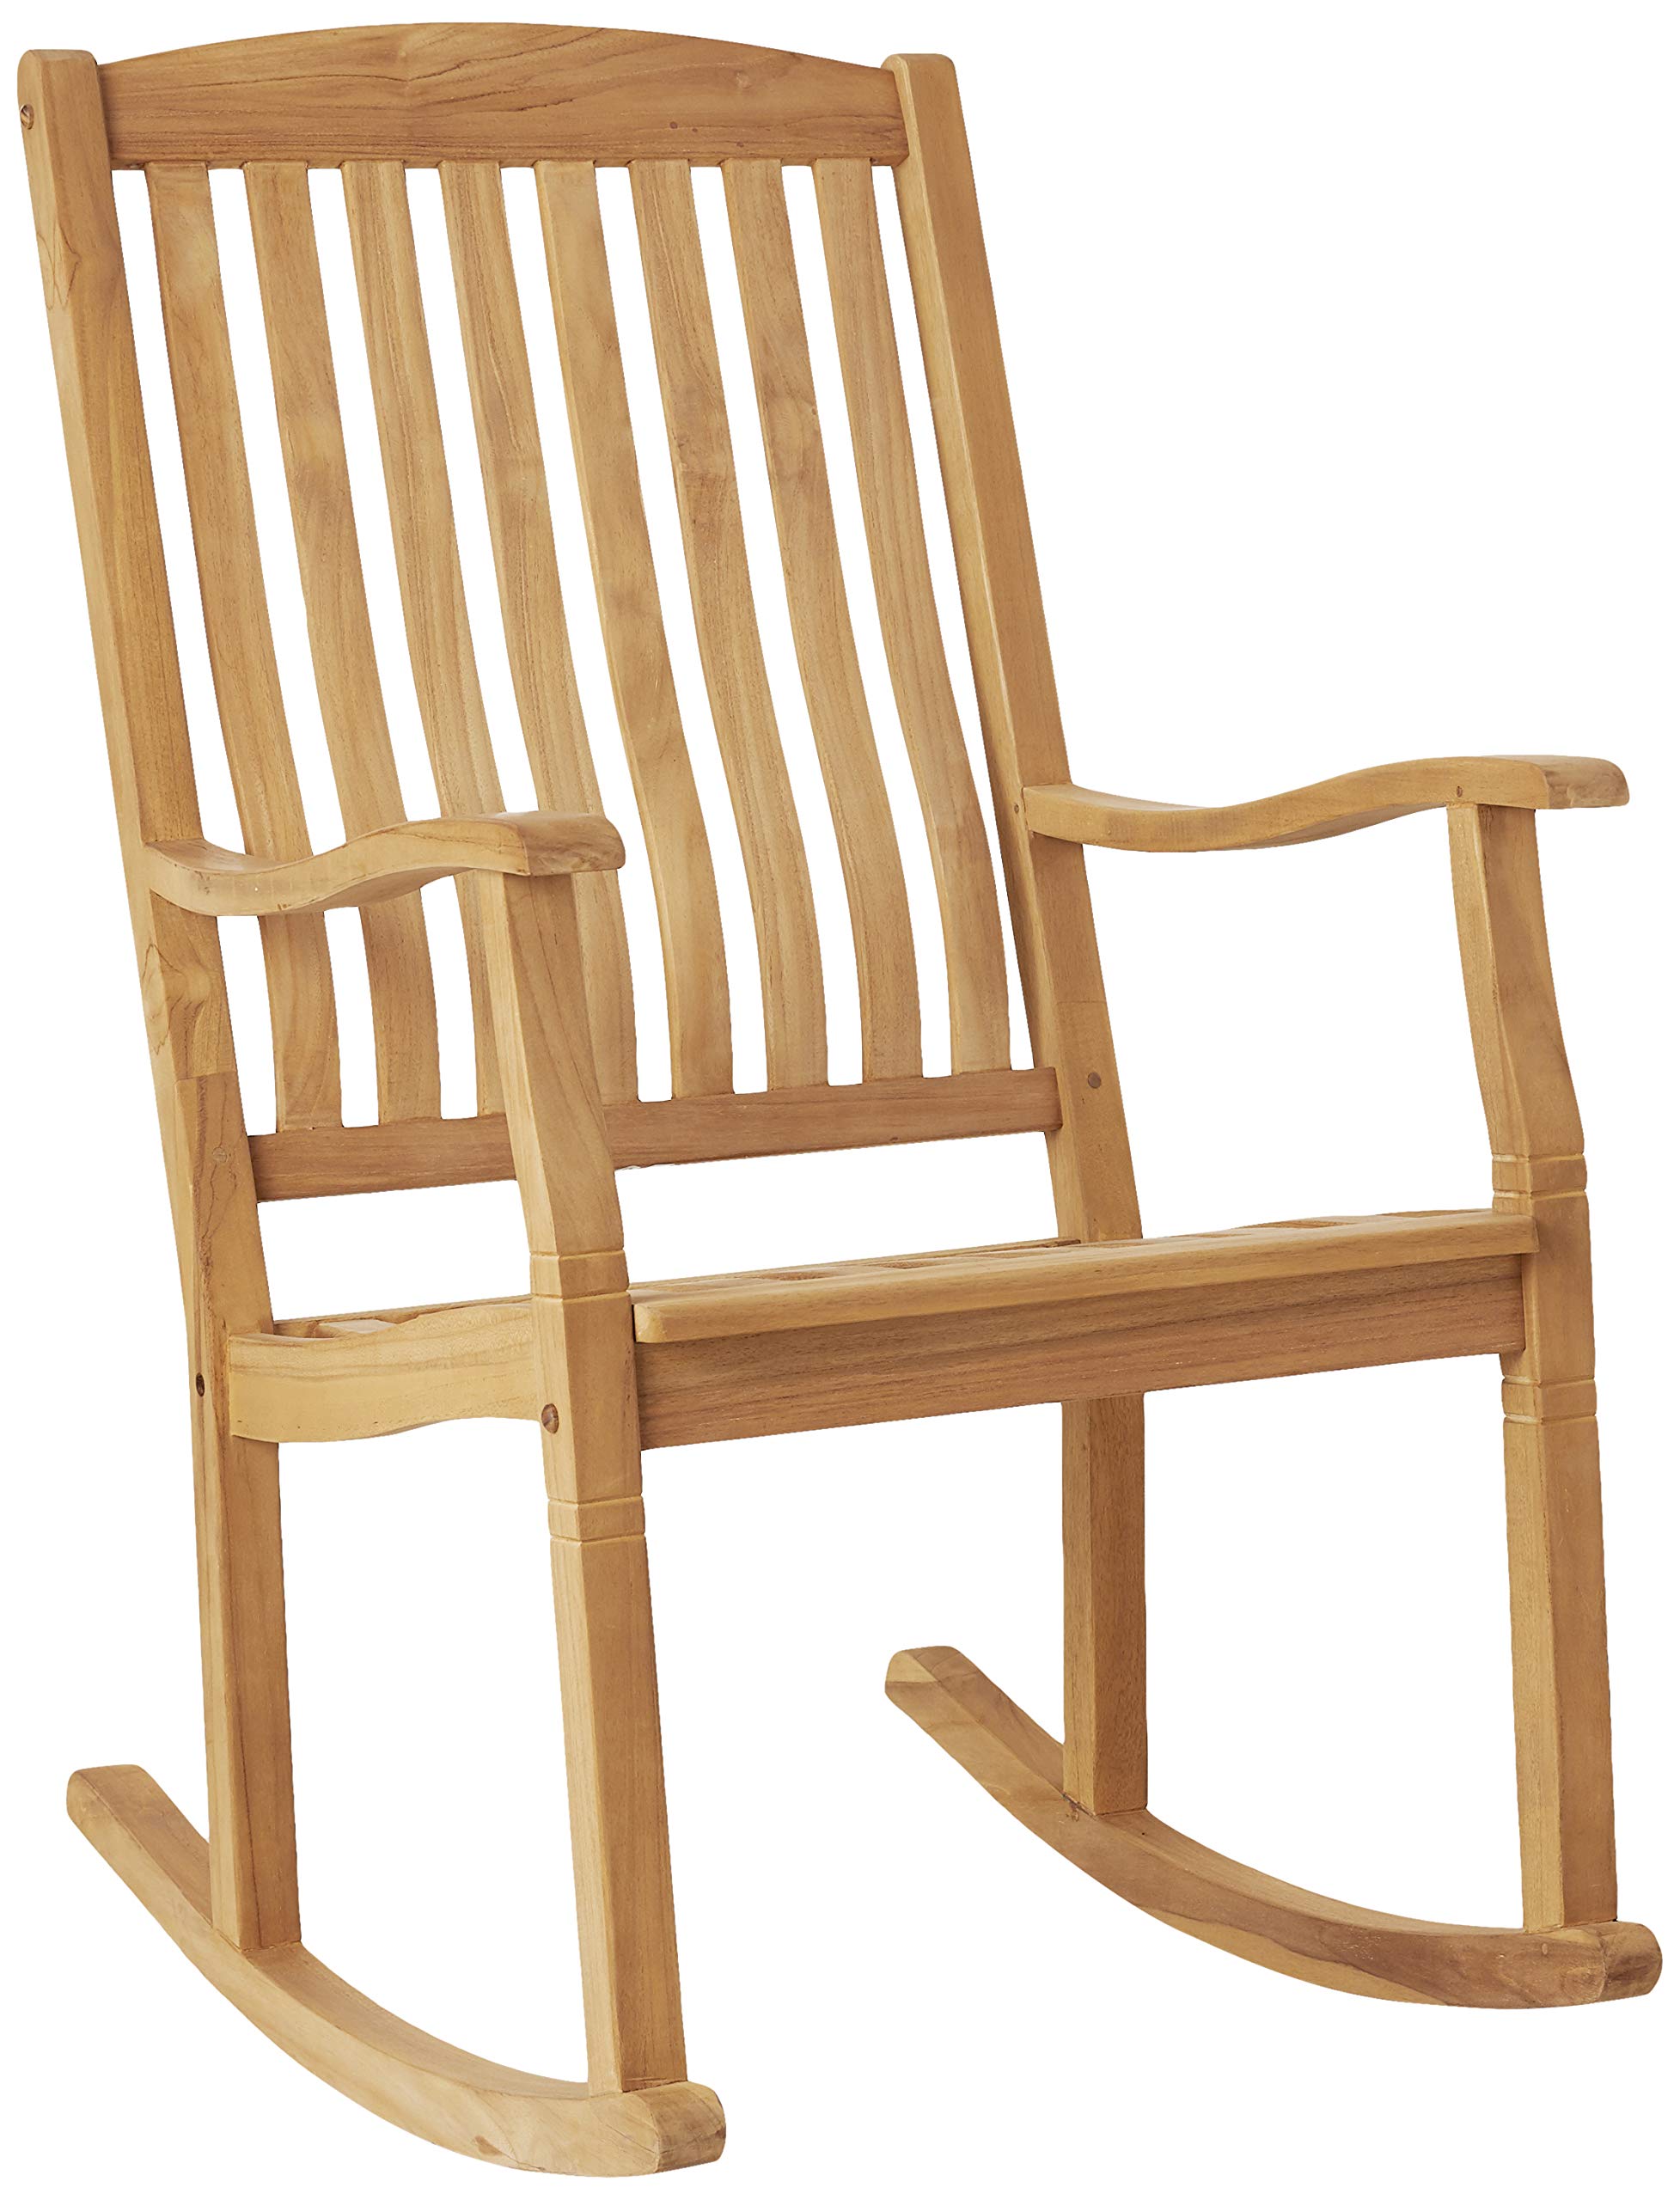 Is This the Most Comfortable Rocking Chair: Why You Need the Cambridge Casual Teak Rocker